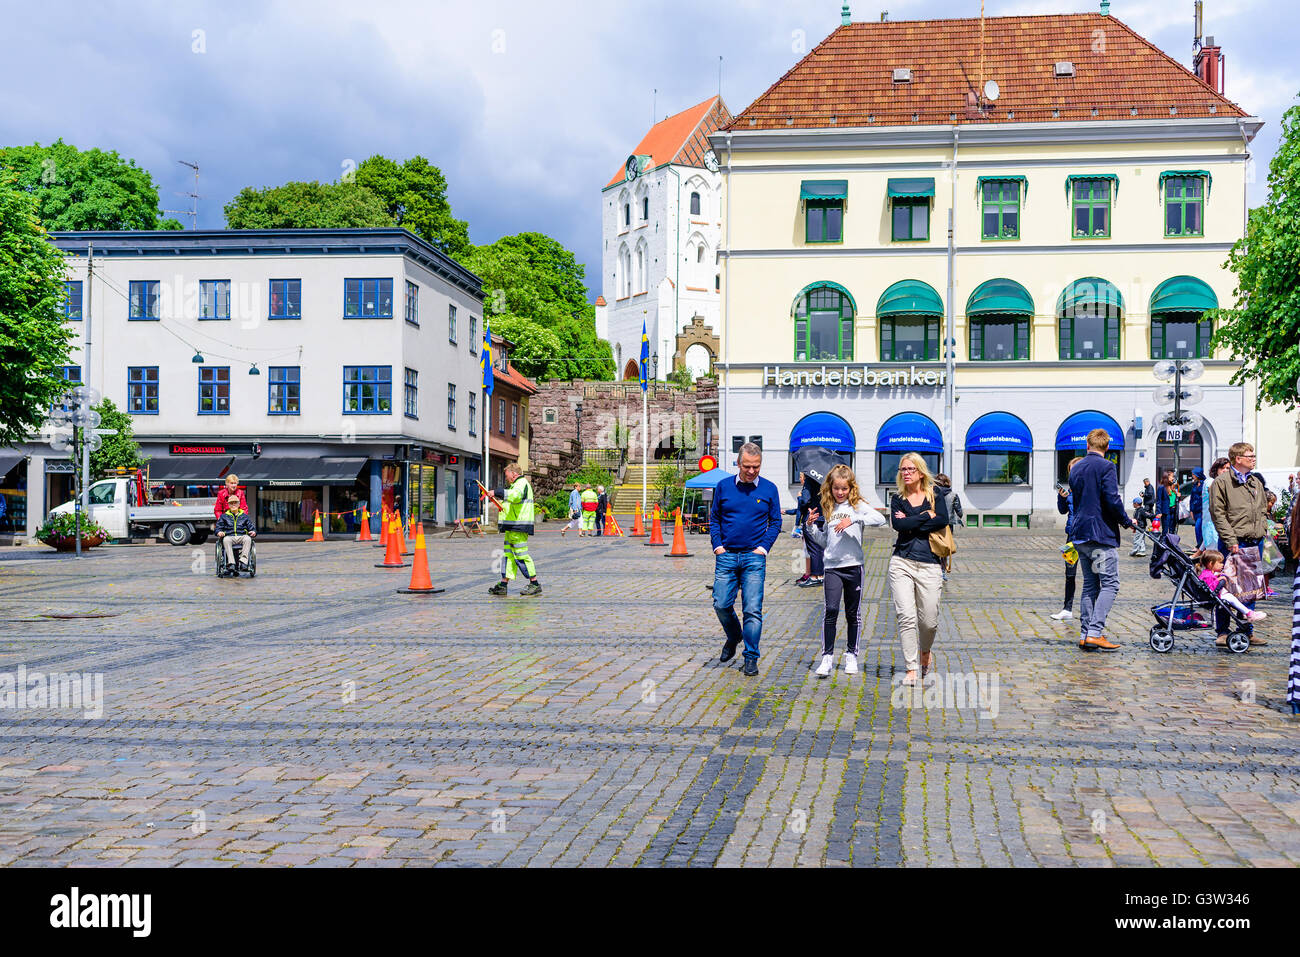 Ronneby, Sweden - June 10, 2016: Town square after a rain with people walking around. Real people in everyday life. Stock Photo